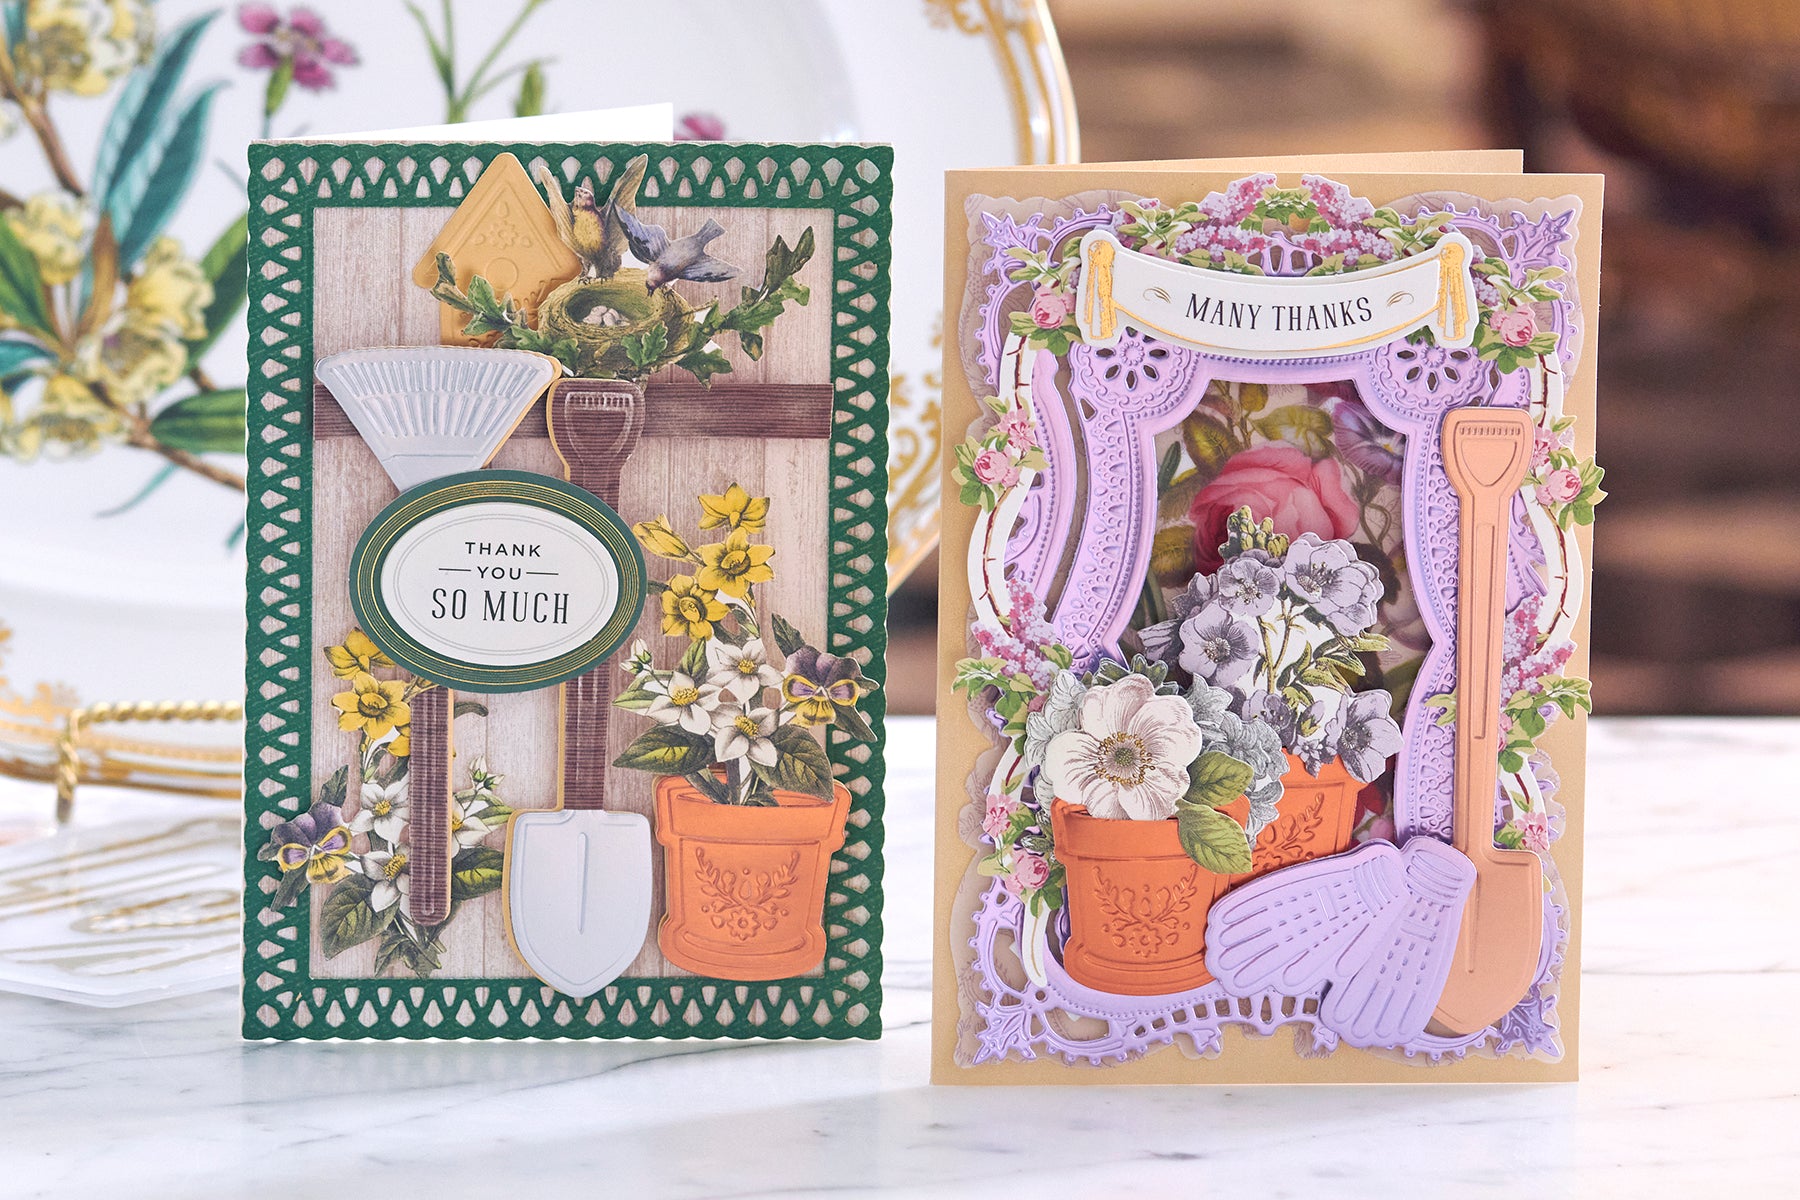 Two intricately designed greeting cards displayed on a table, one with a gardening theme and the other floral, expressing gratitude.